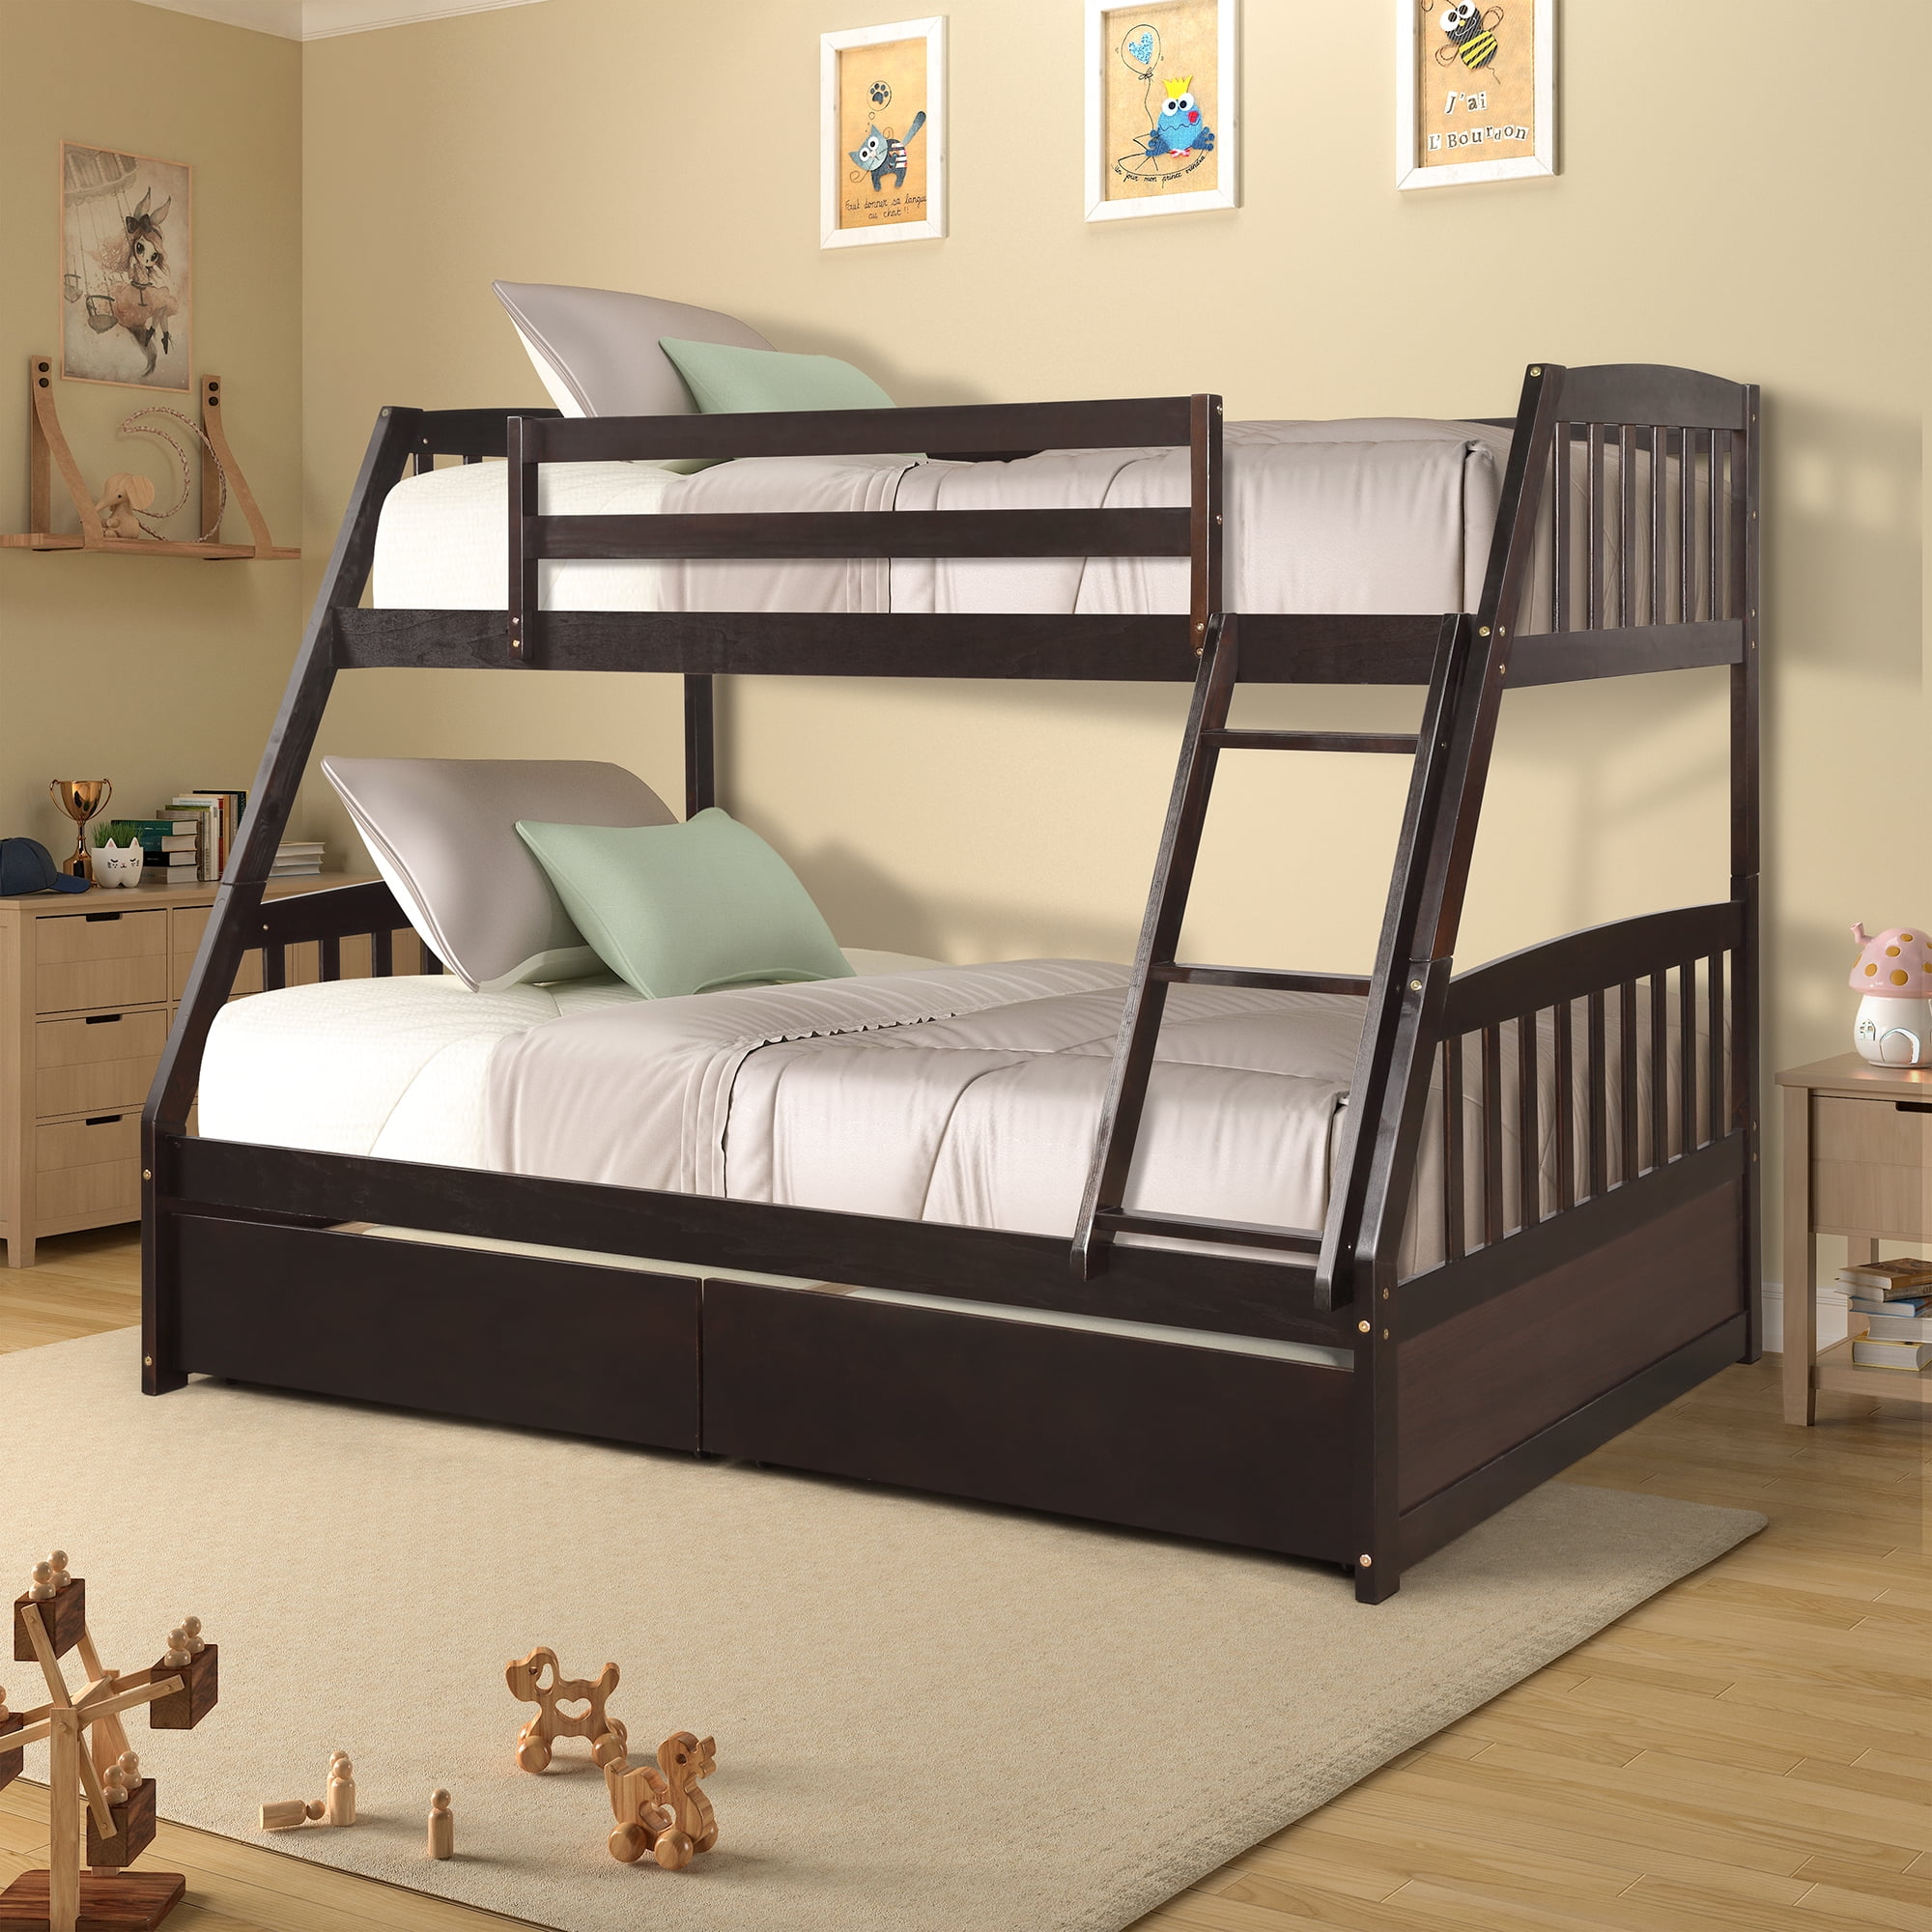 Convertible Into Two Individual Solid Wood Beds Children Twin Sleeping Bedroom Furniture W/Ladder and Safety Rail for Kids Boys & Girls Espresso Costzon Twin Over Twin Bunk Beds 